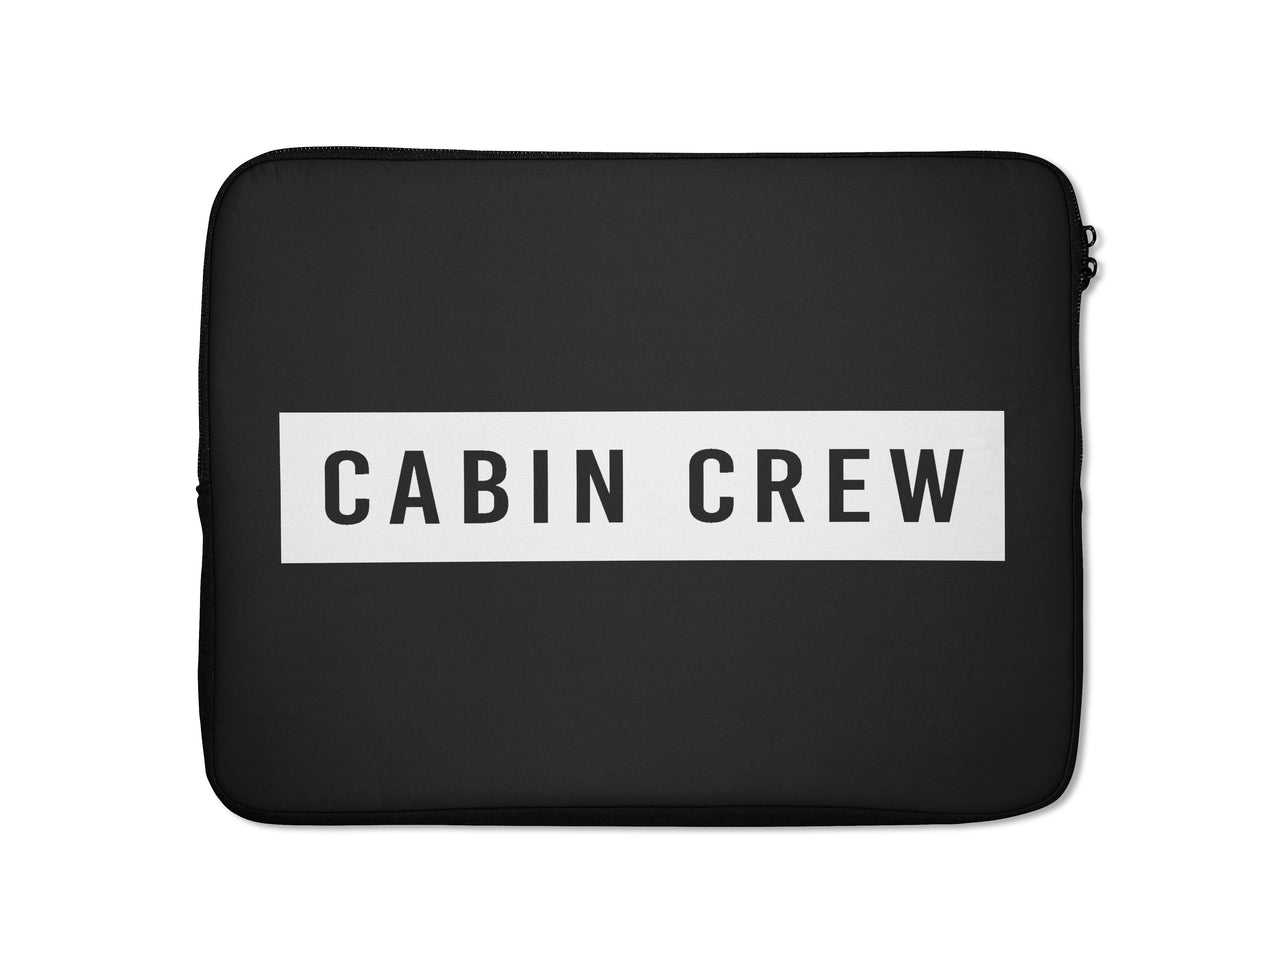 Cabin Crew Text Designed Laptop & Tablet Cases